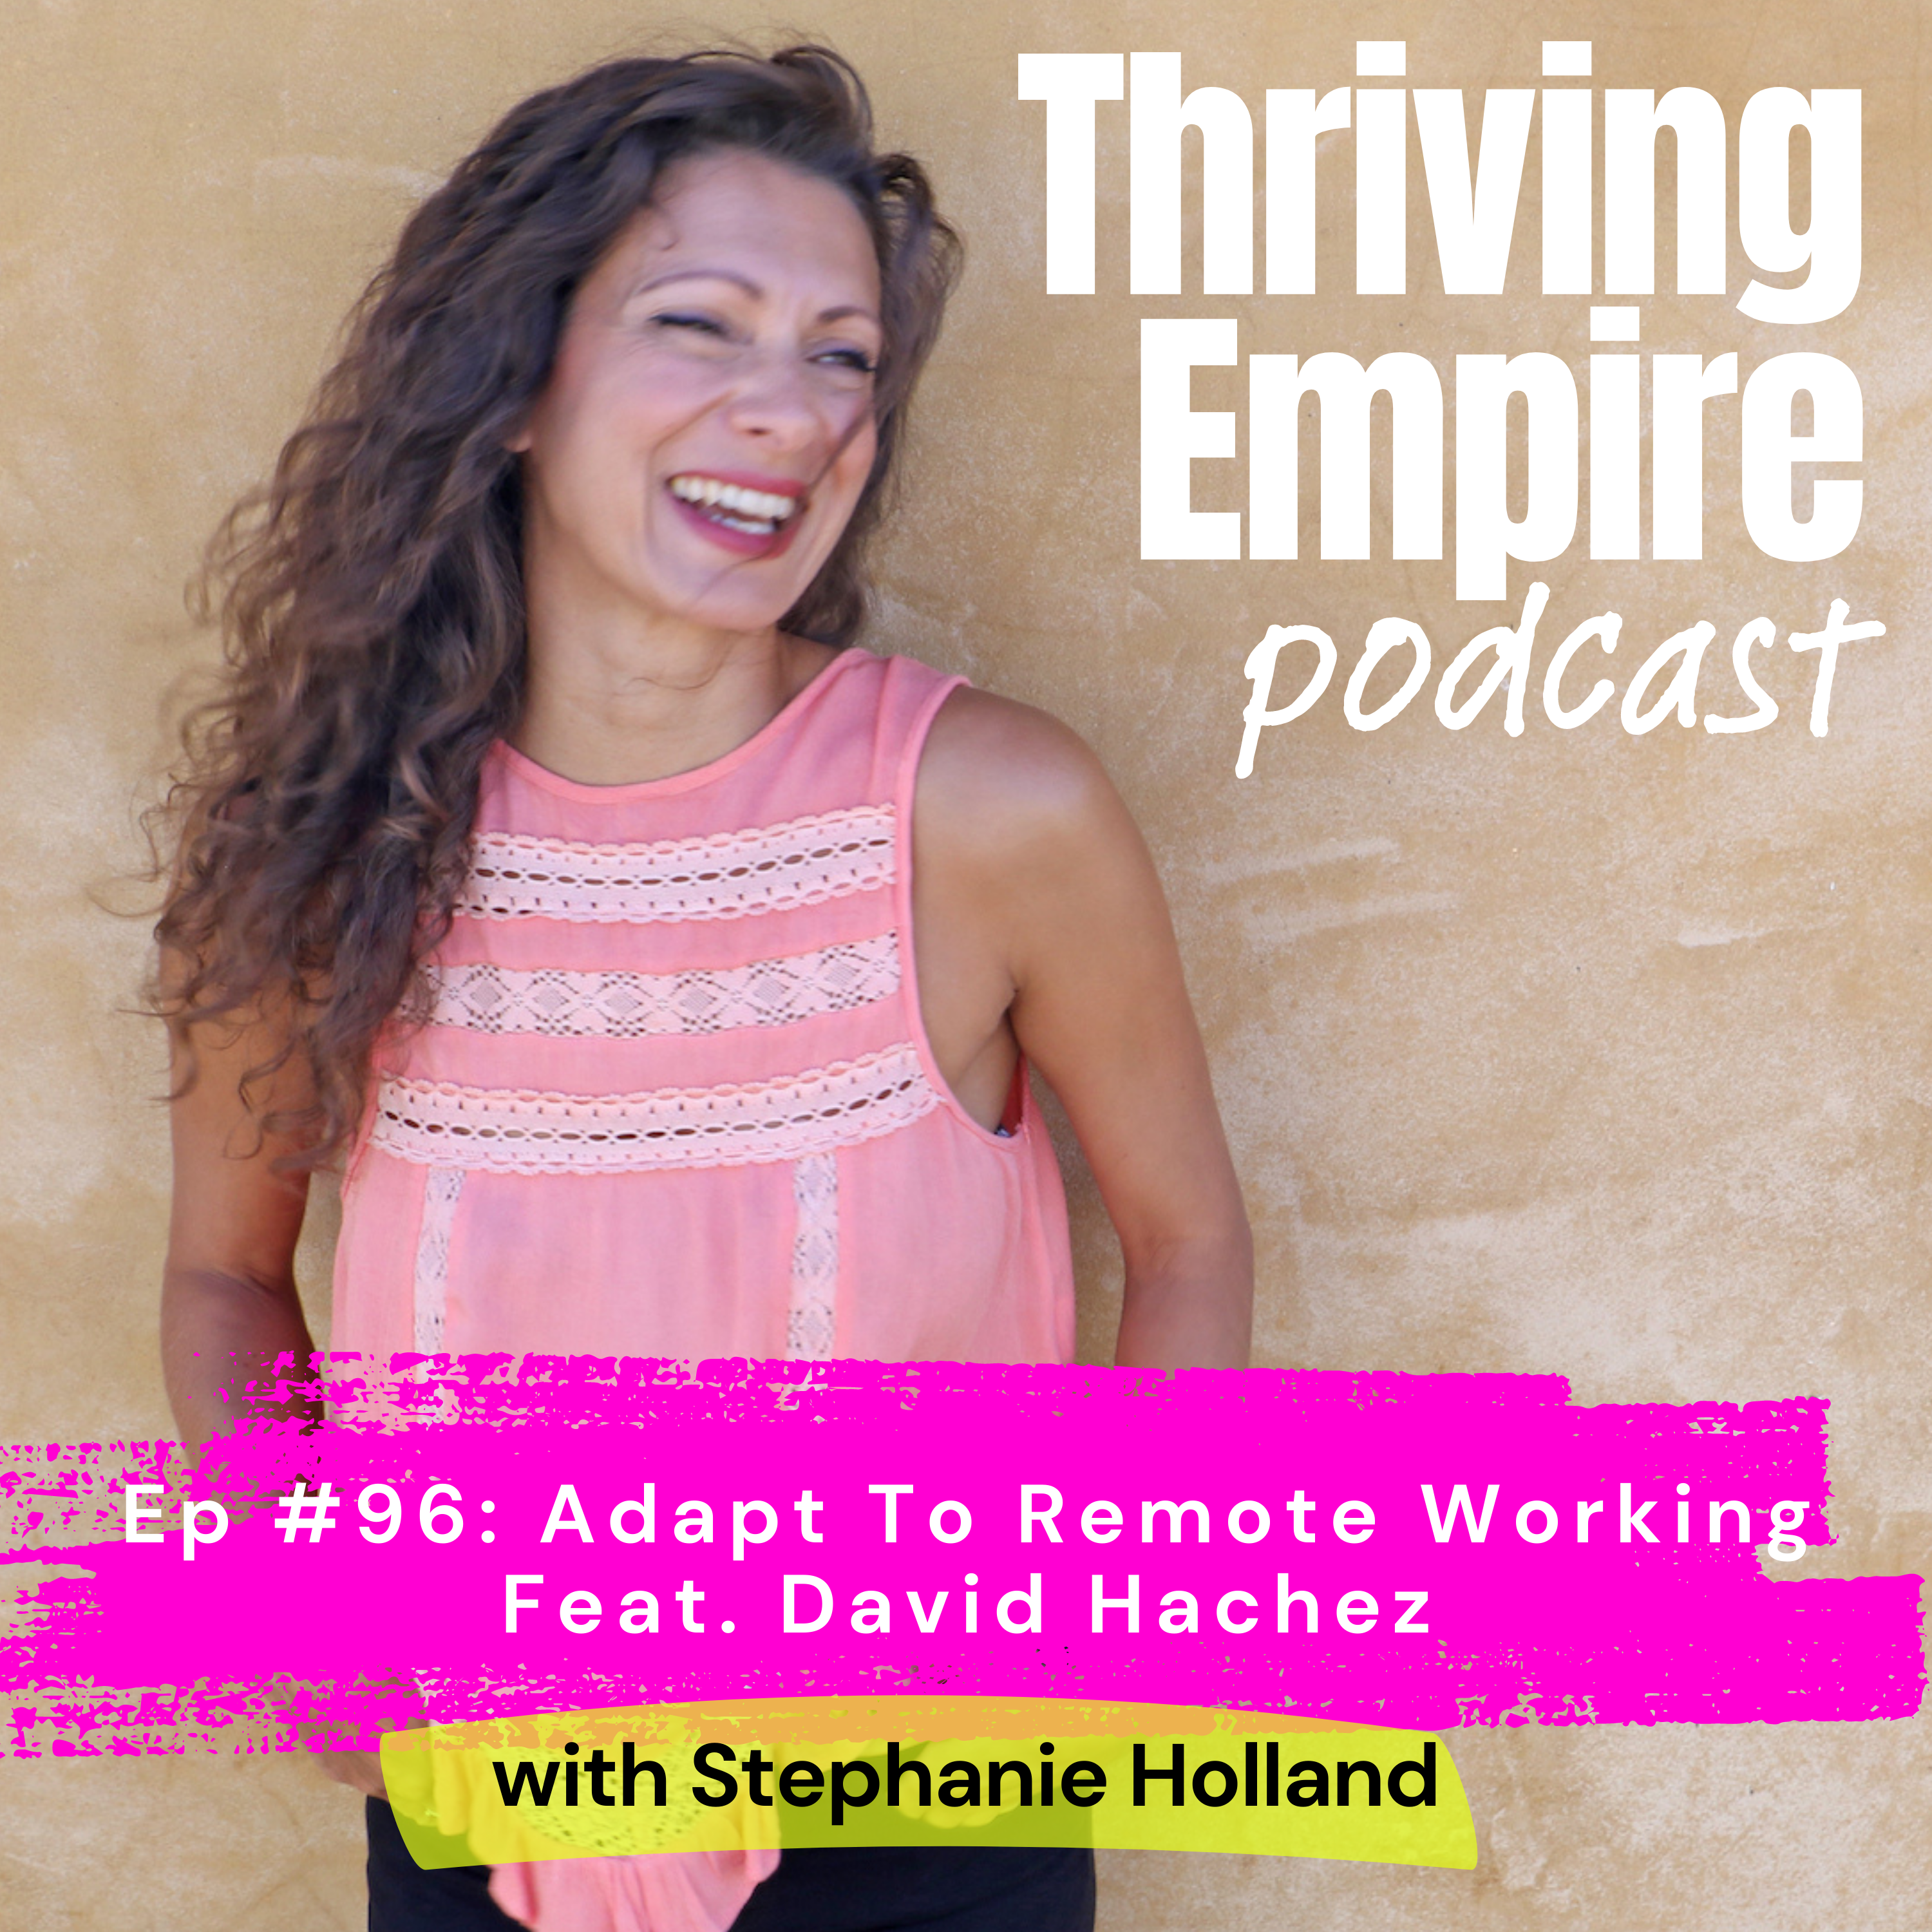 Ep #96: Adapt To Remote Working Feat. David Hachez